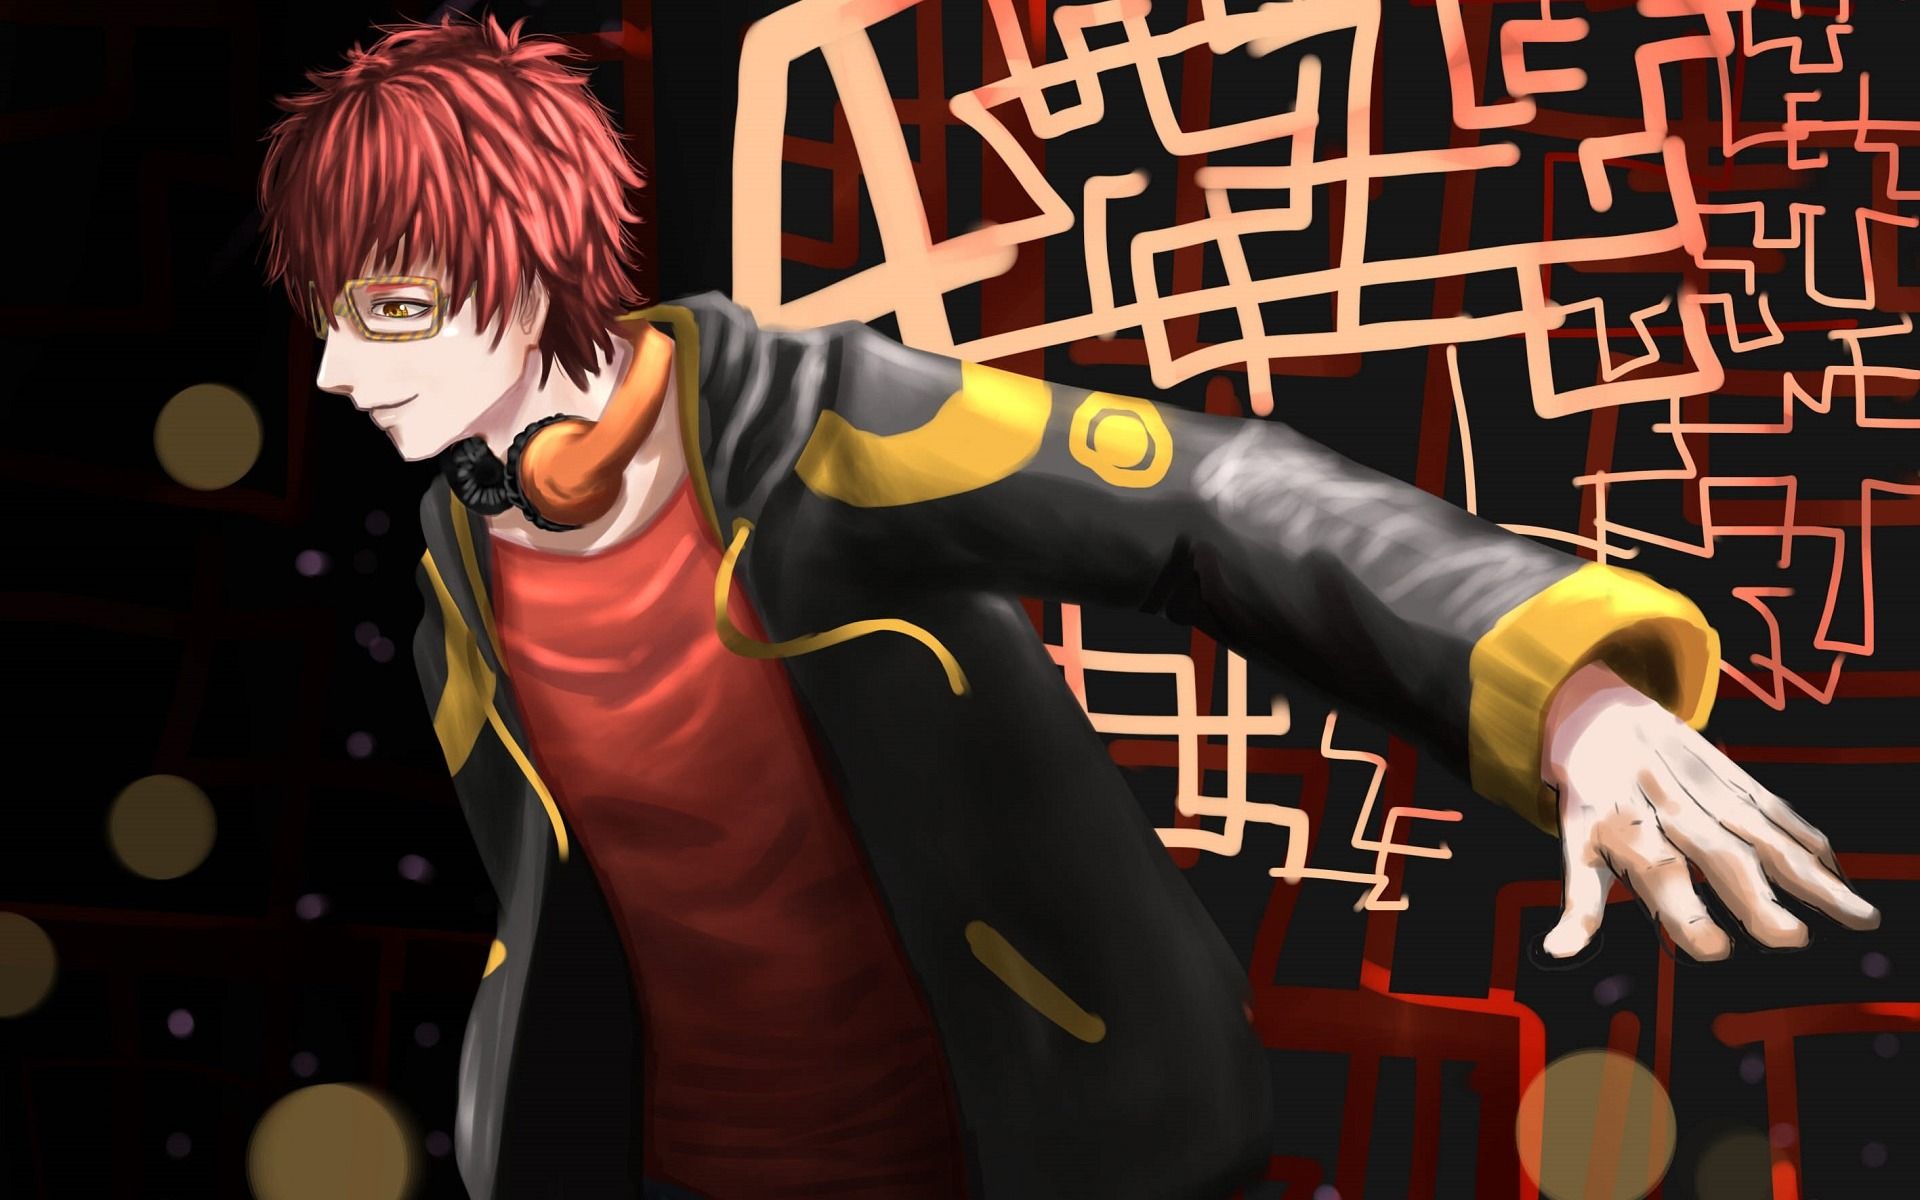 Download wallpaper Mystic Messenger, art, anime male characters